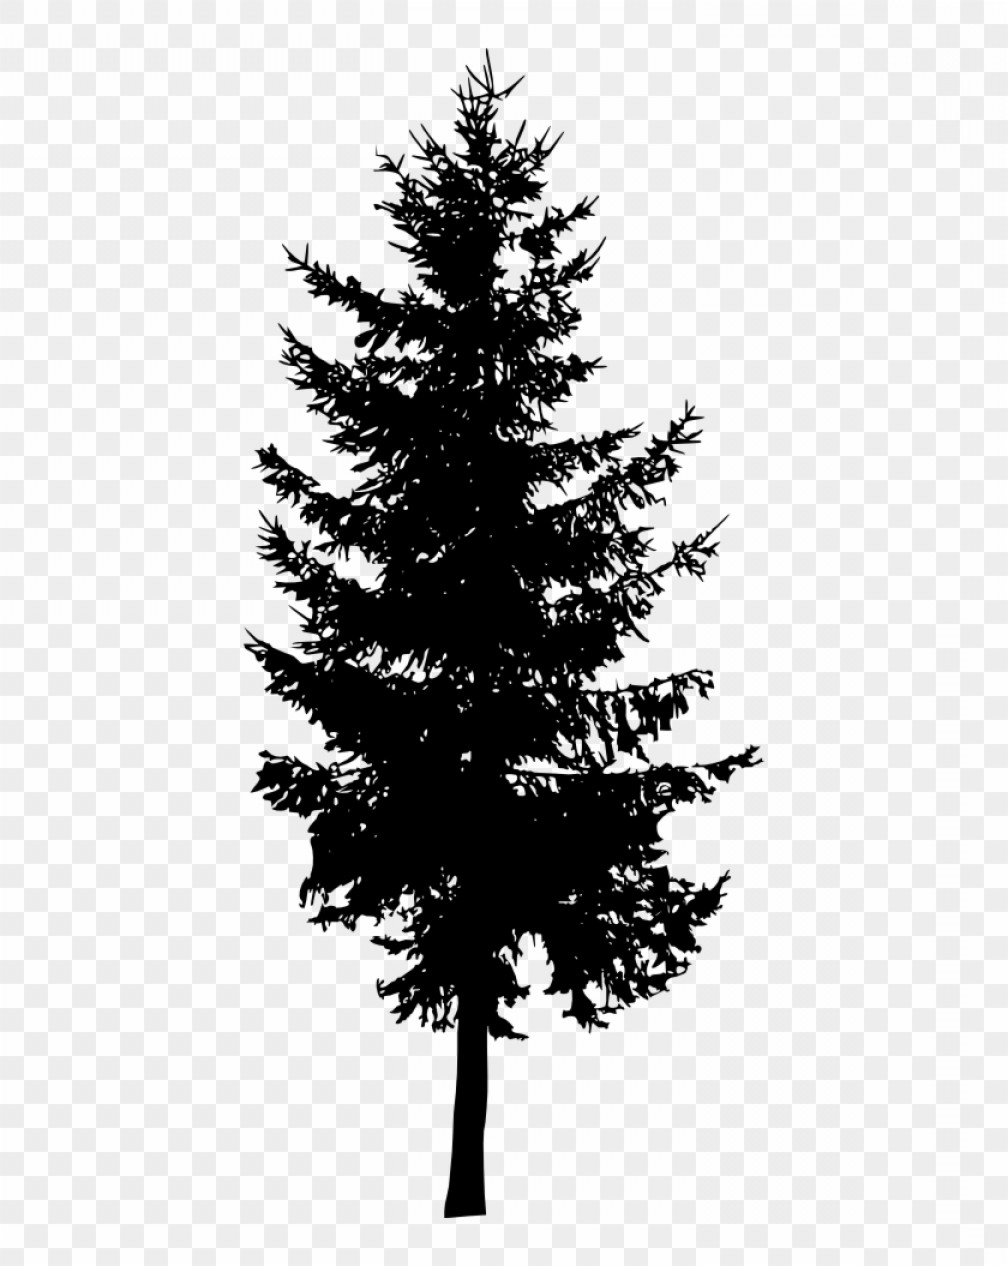 Evergreen Tree Silhouette Vector at Vectorified.com | Collection of ...